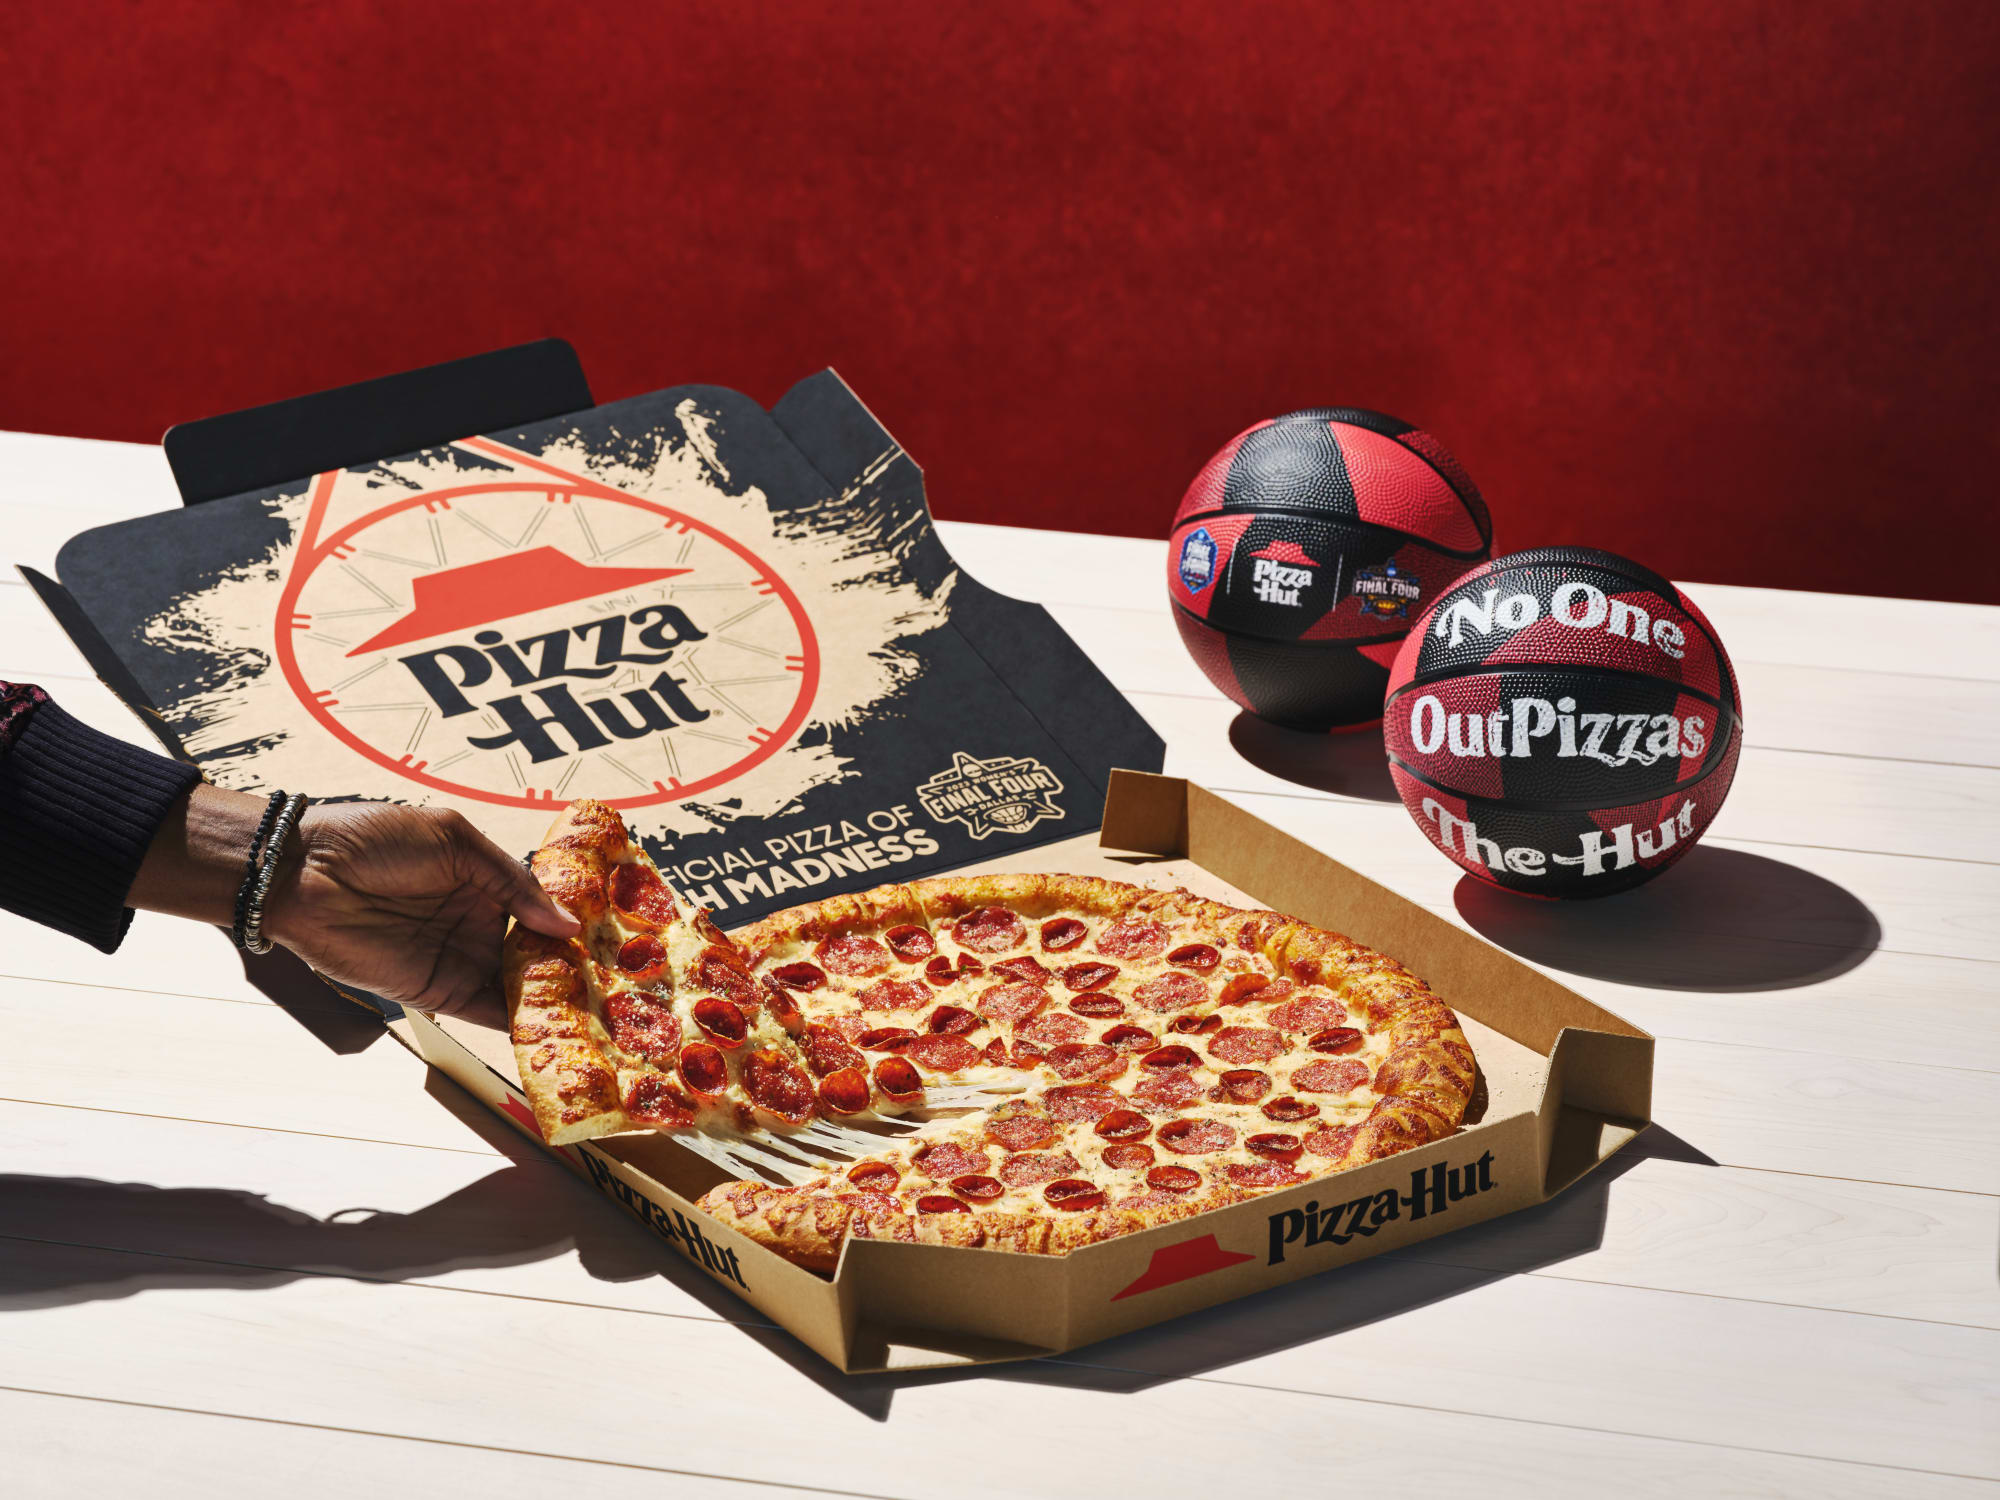 Pizza Hut shoots and scores with the return of its interactive